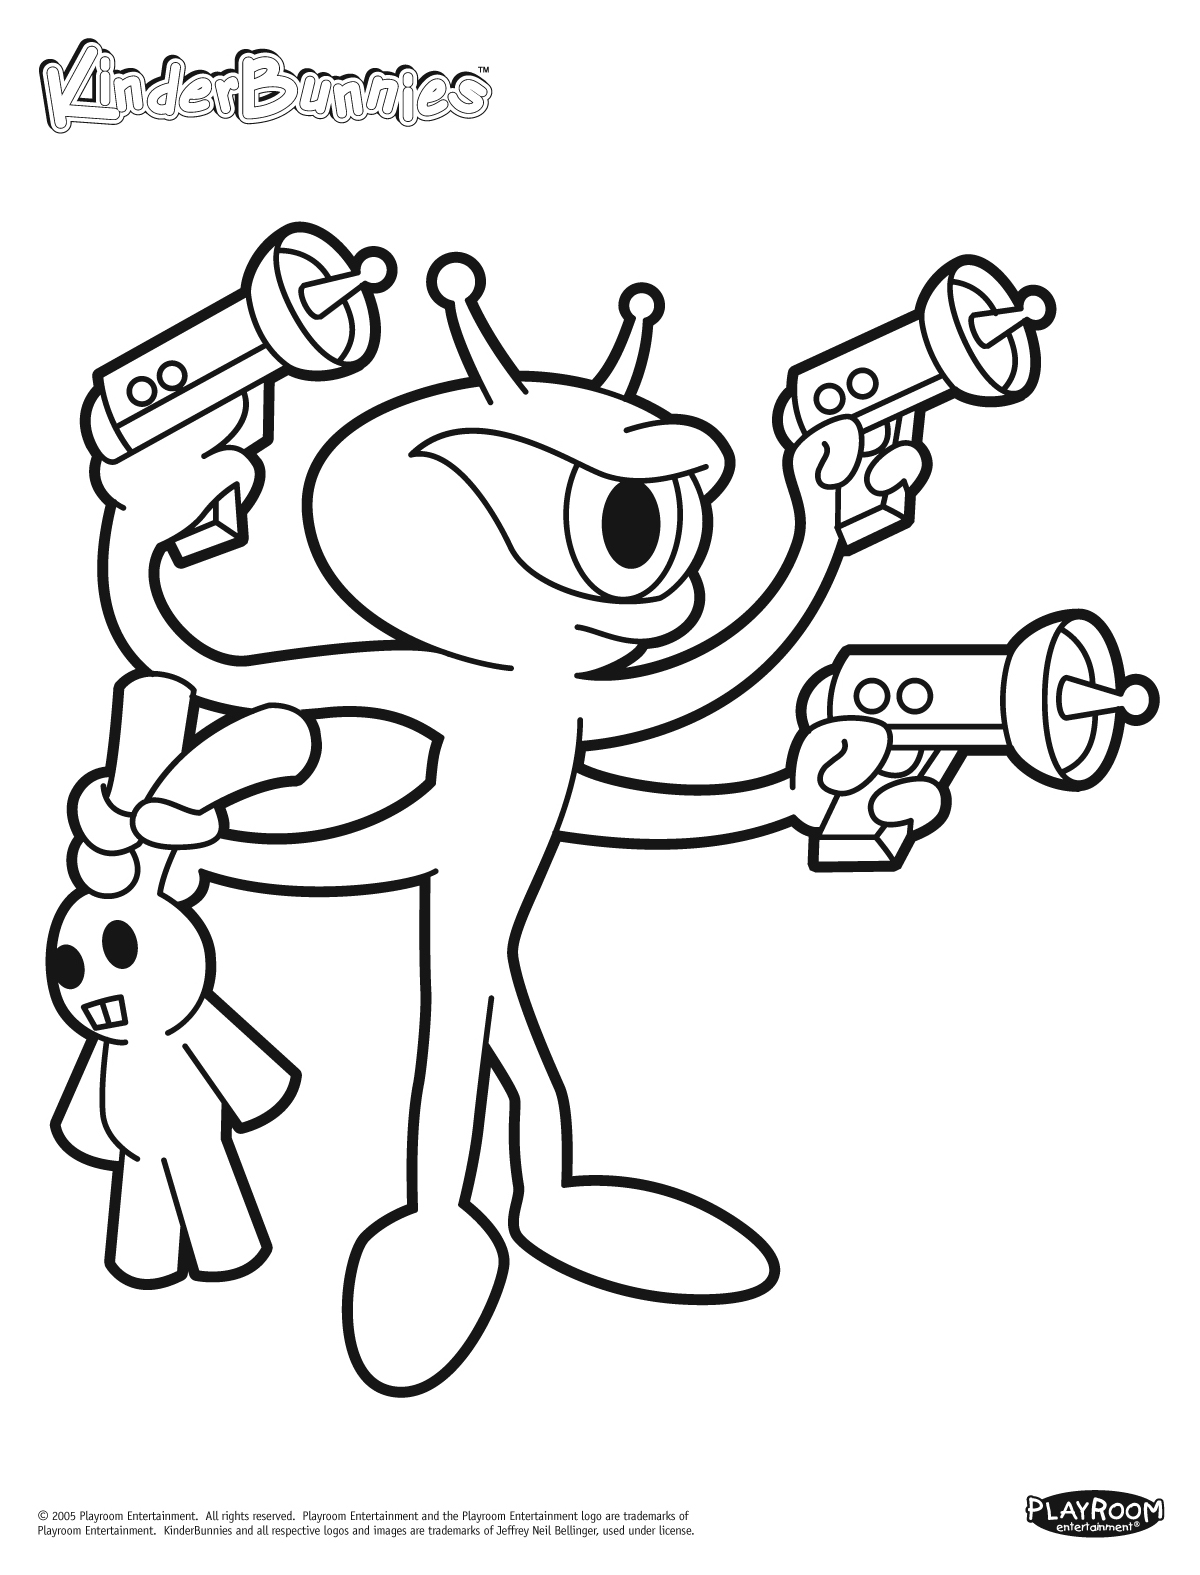 Alien coloring pages to download and print for free